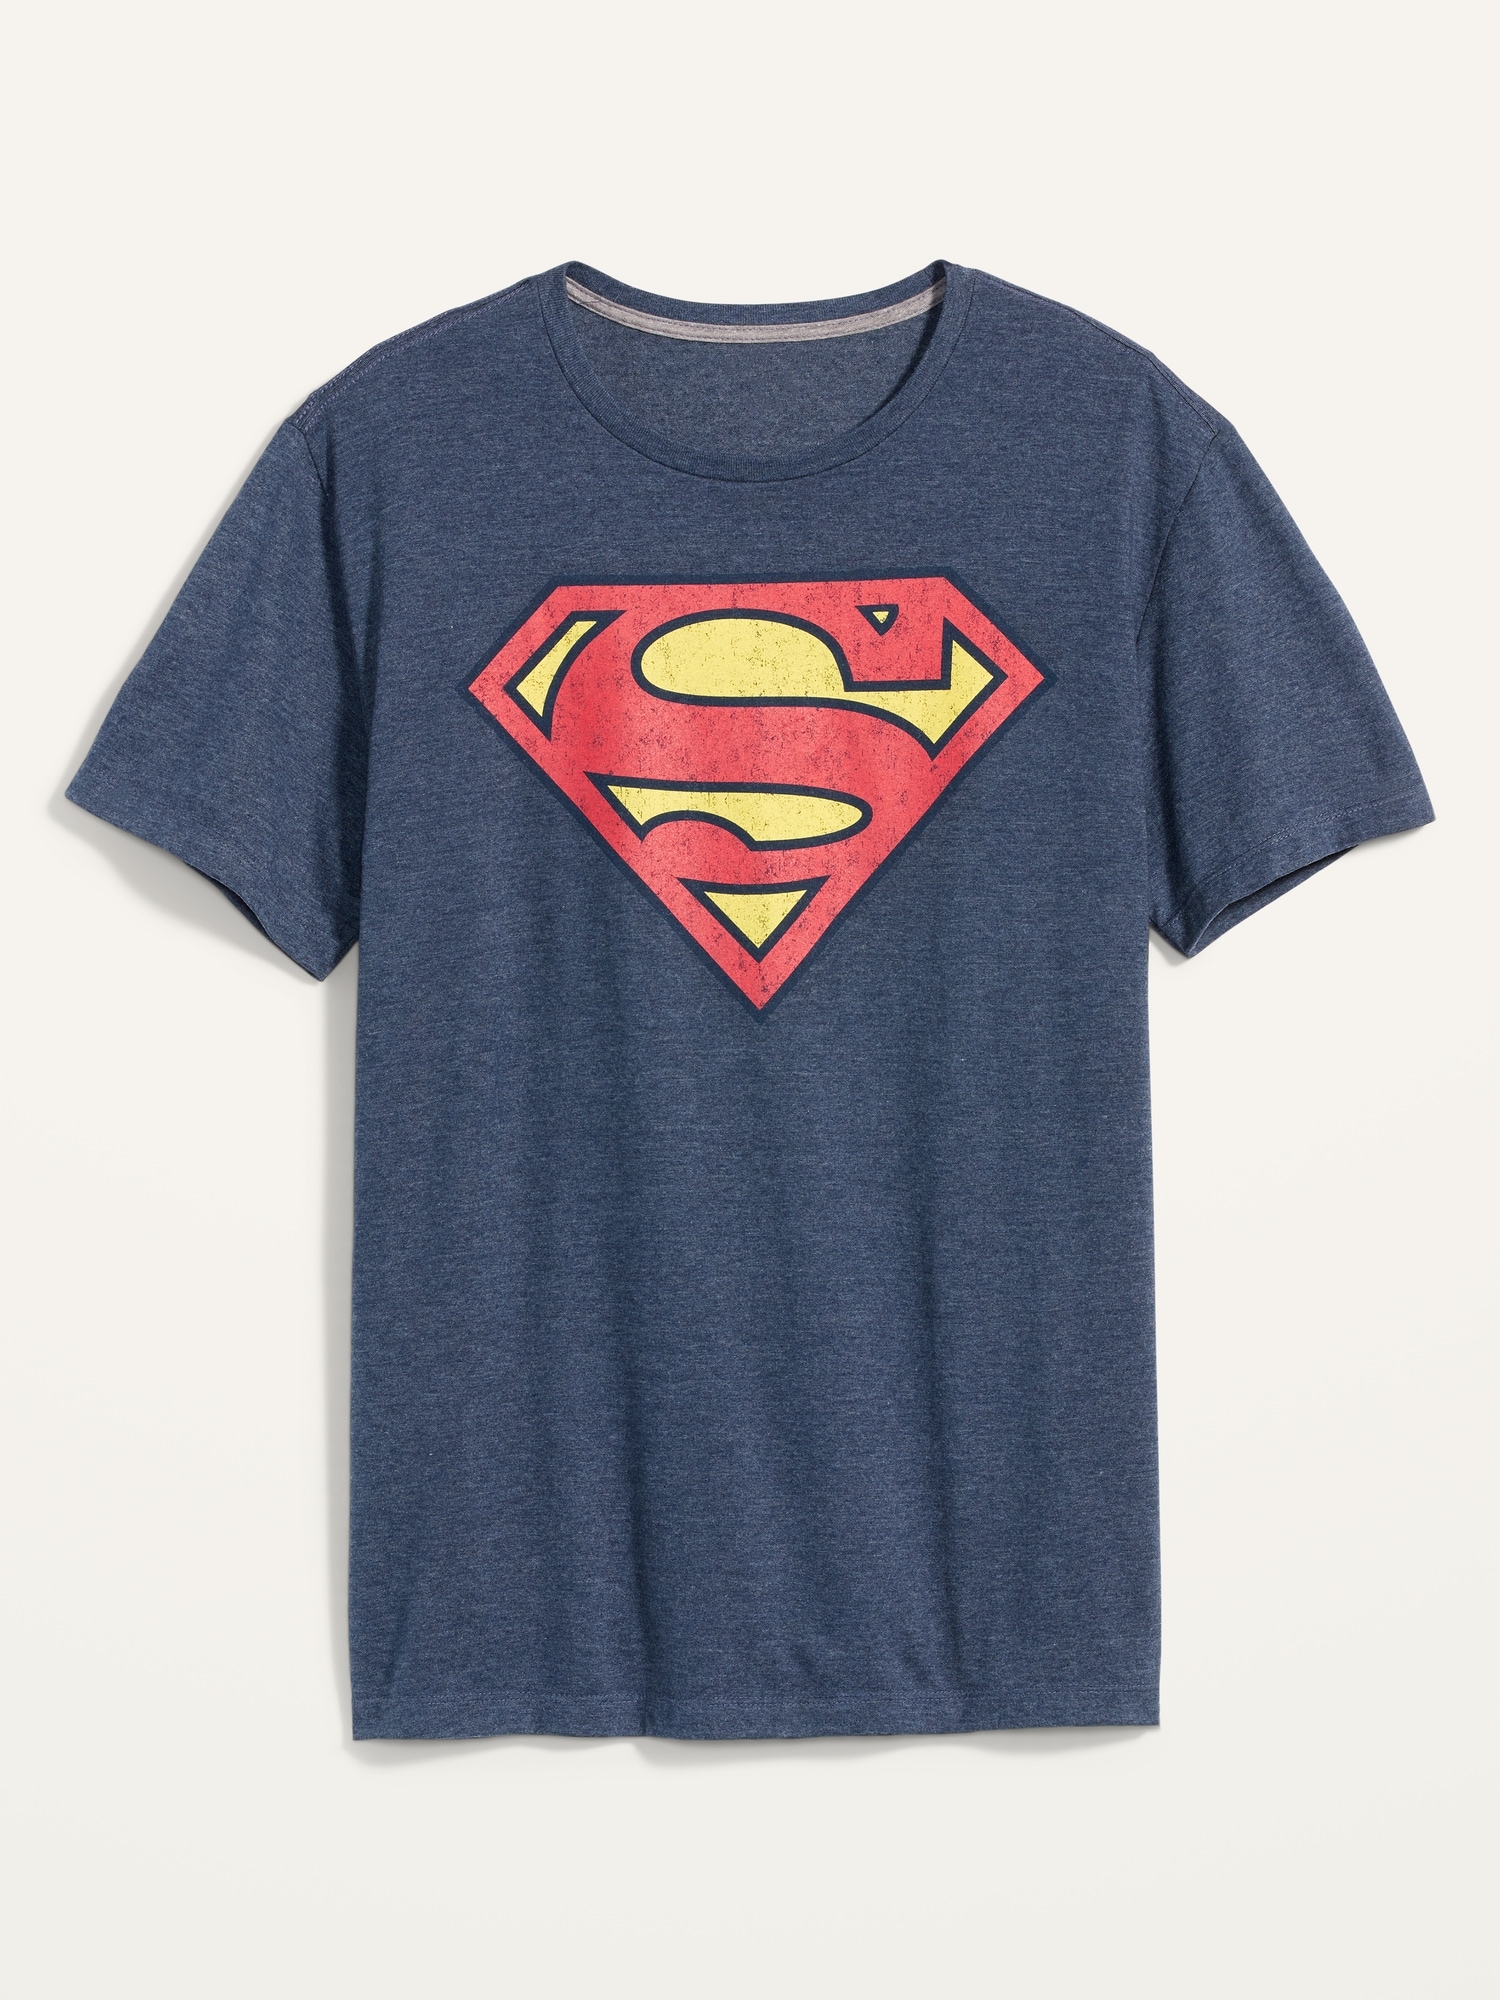 Comics™ Superman Gender-Neutral T-Shirt for Adults Old